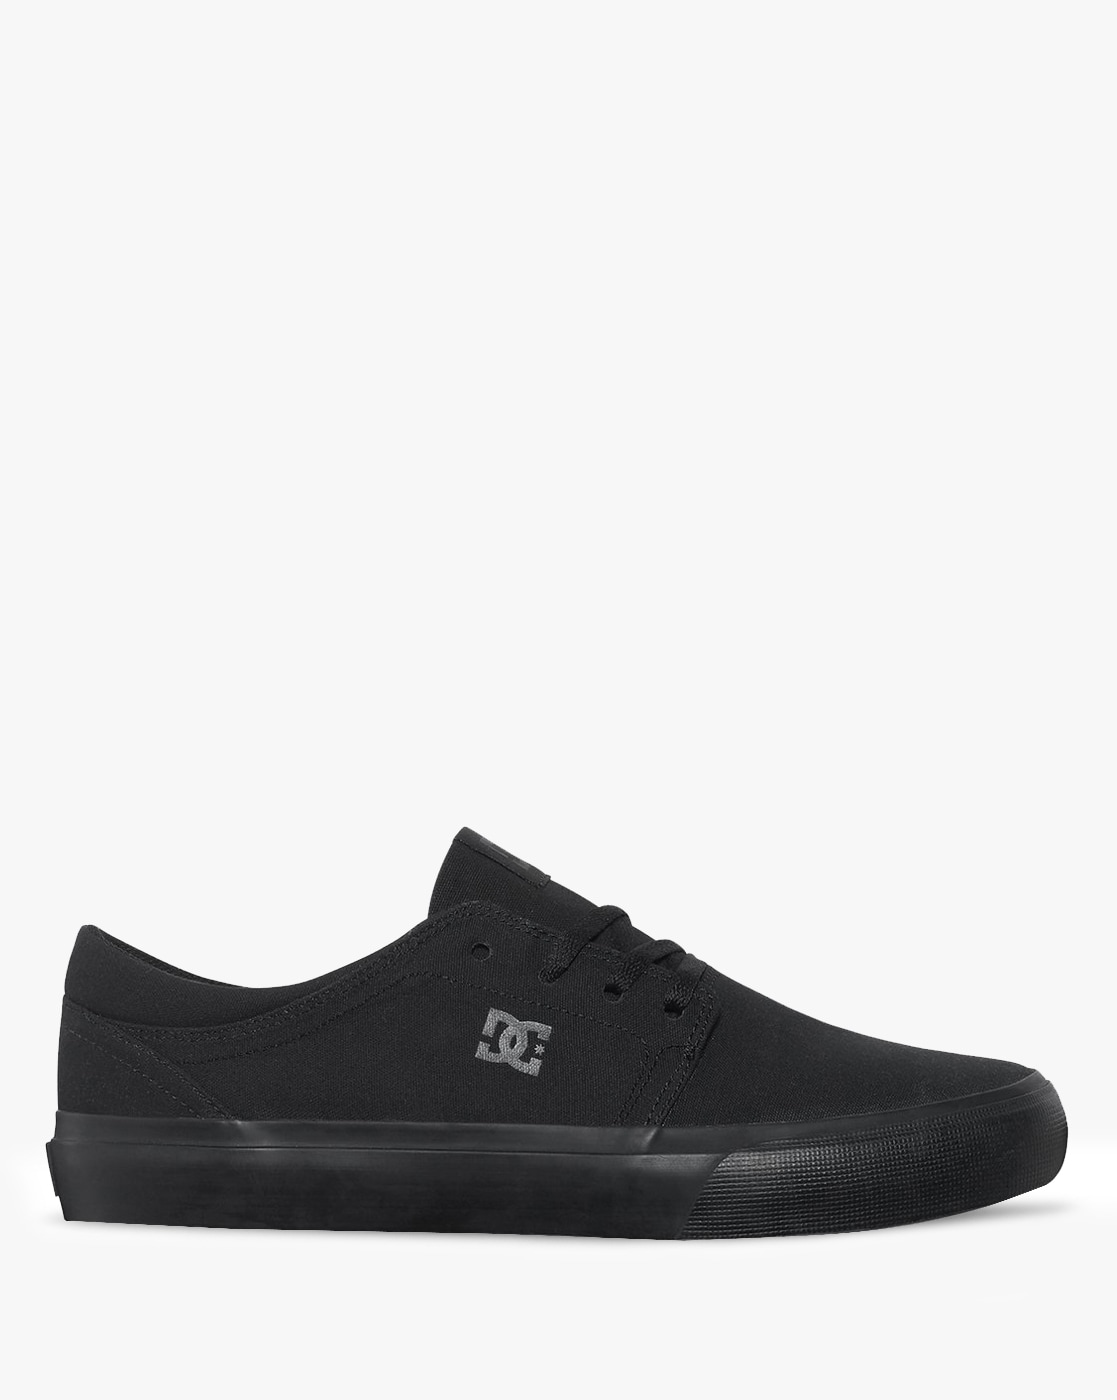 Buy Black Casual Shoes for Men by DC 